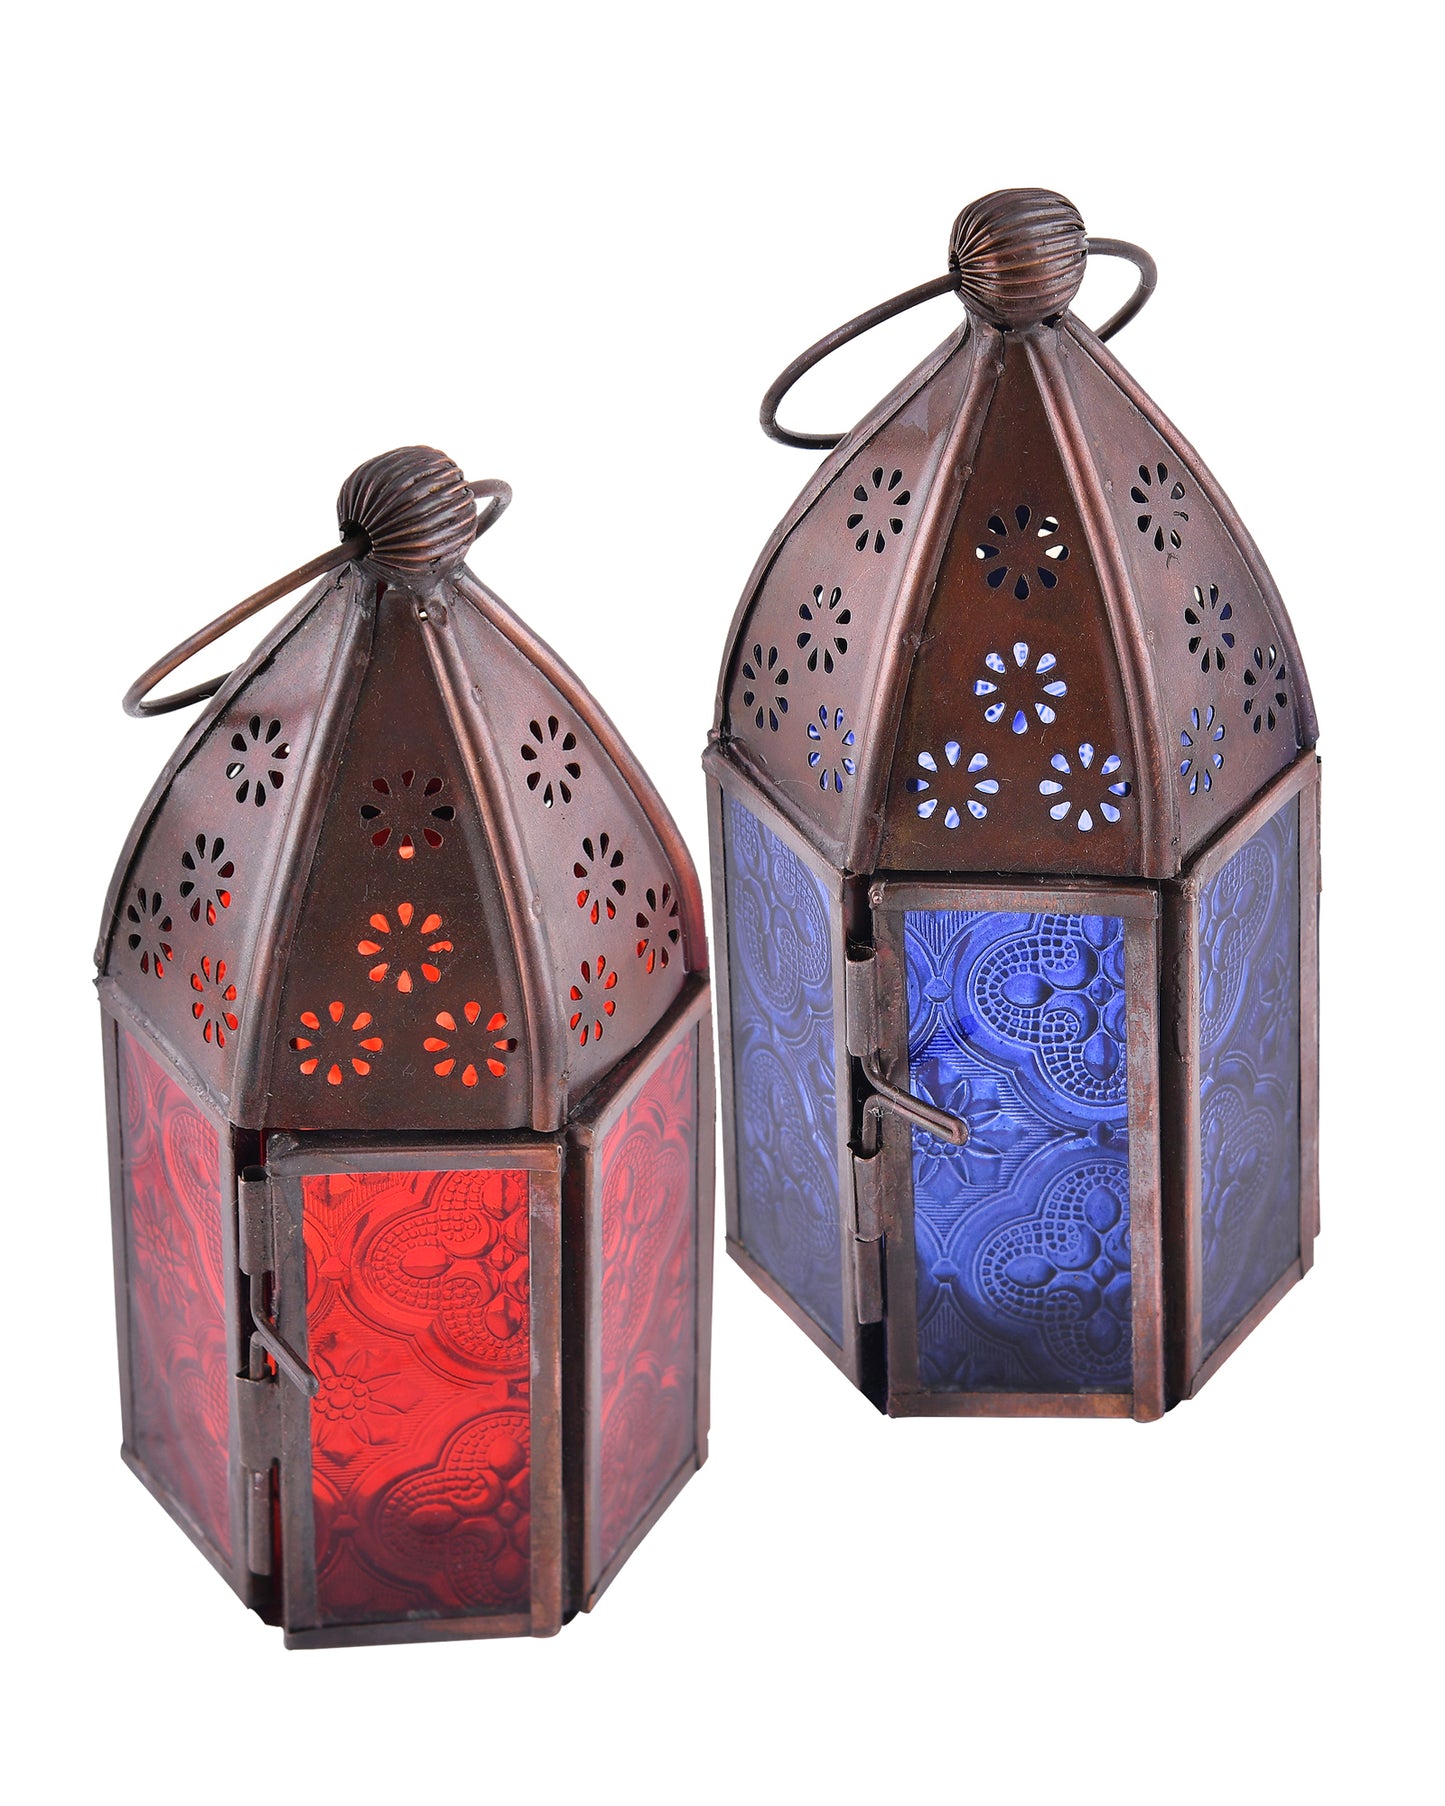 Metal Decorative Antique Copper Finish Moroccan Lantern Candle Holder, Set of 2, Tealight Hanging Home Office Decor